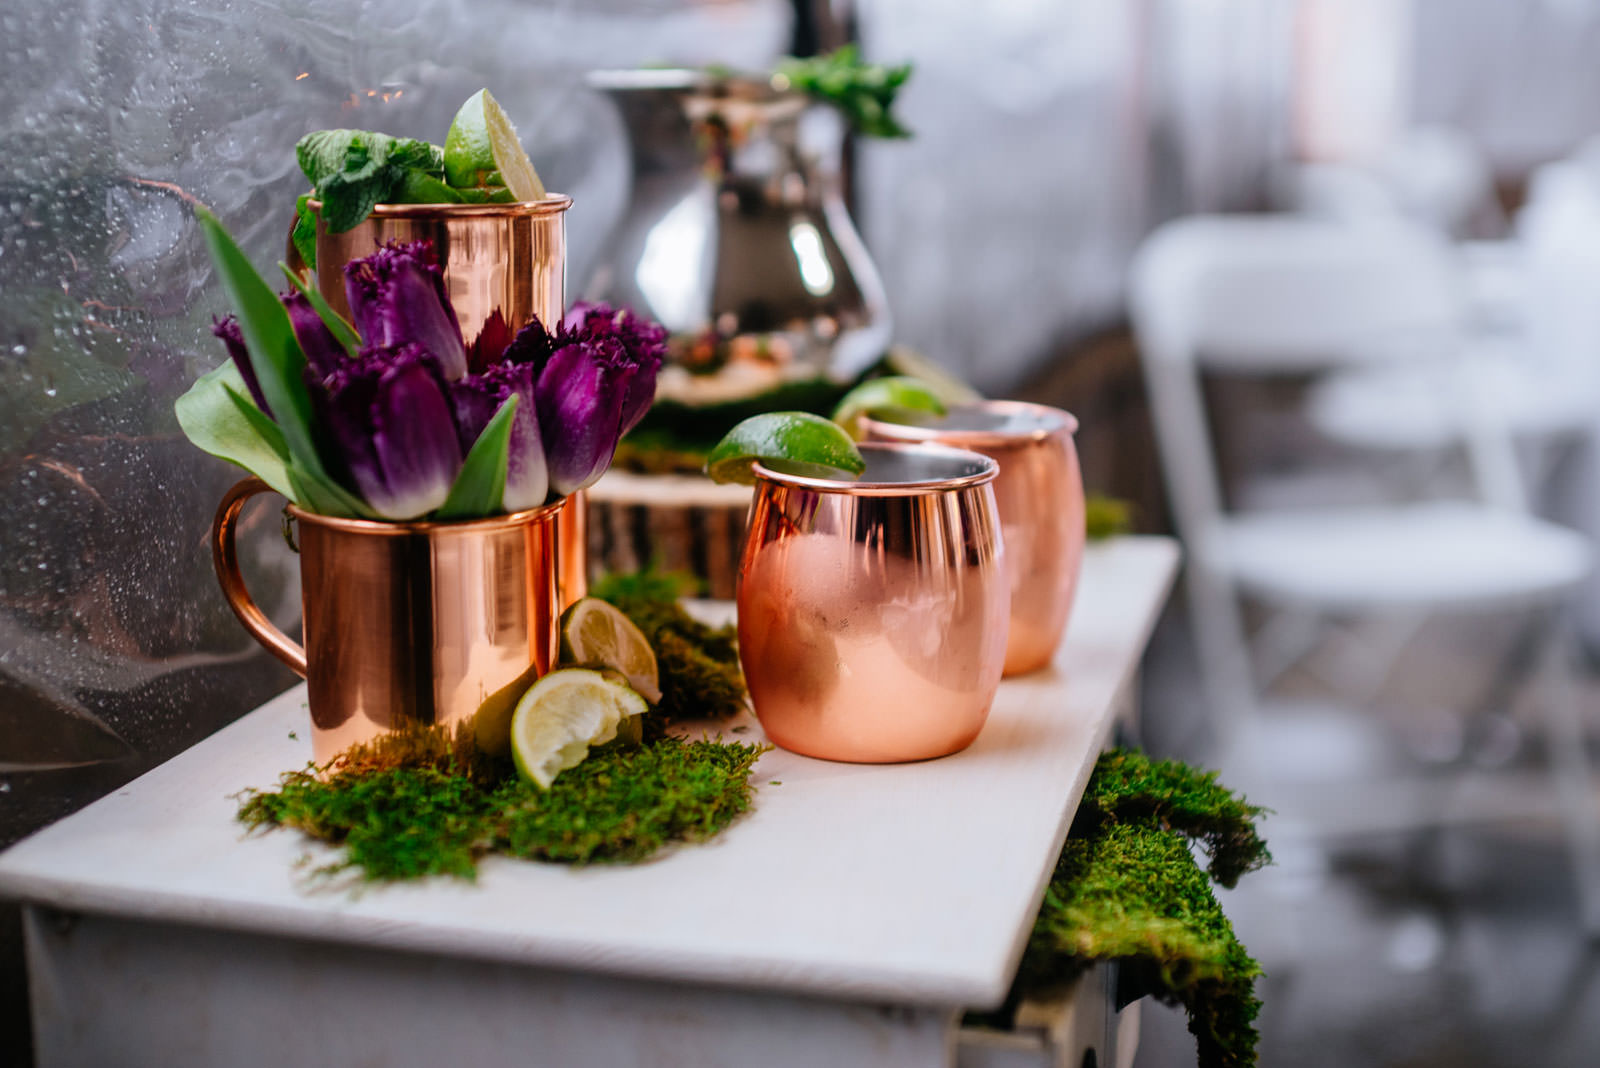 moscow mule table wedding details